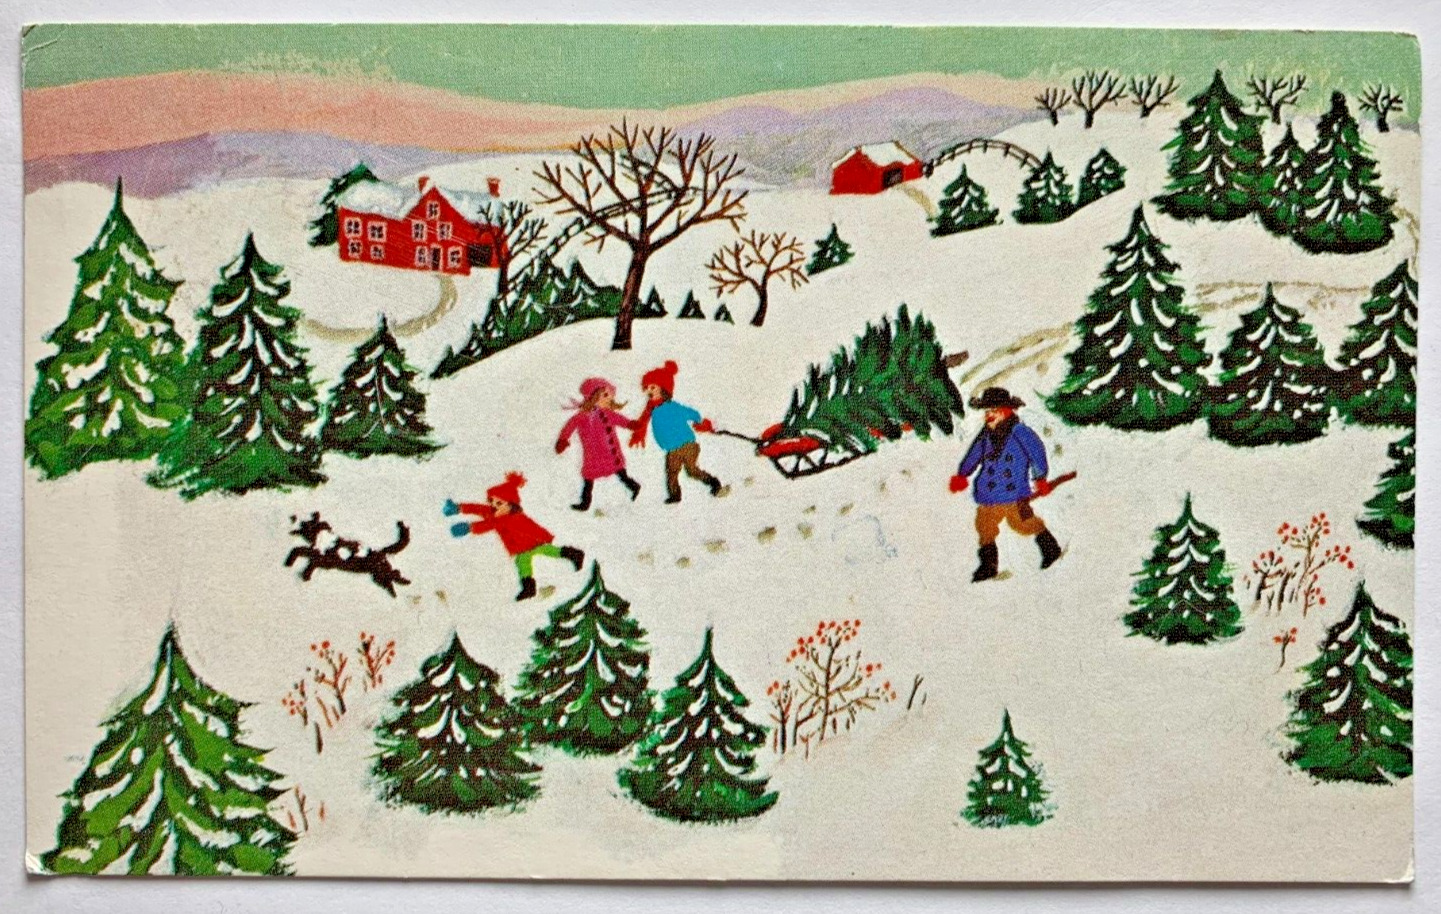 Christmas Bring Home The Tree Postcard Evergreen Press Frank Remkiewicz Posted